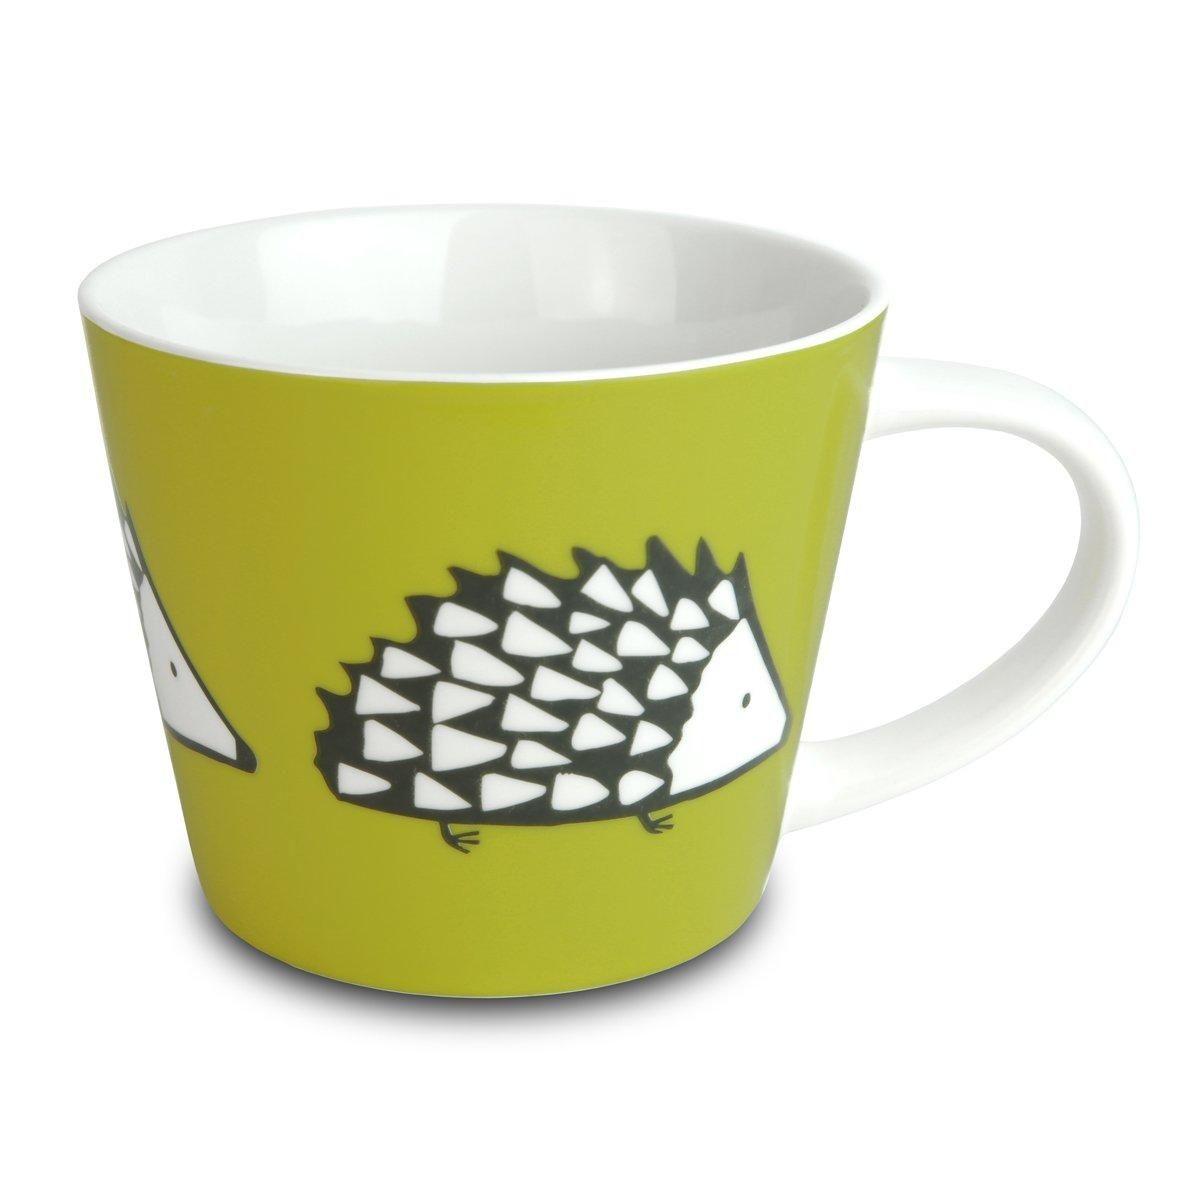  Mugs And Cups SC-0193 